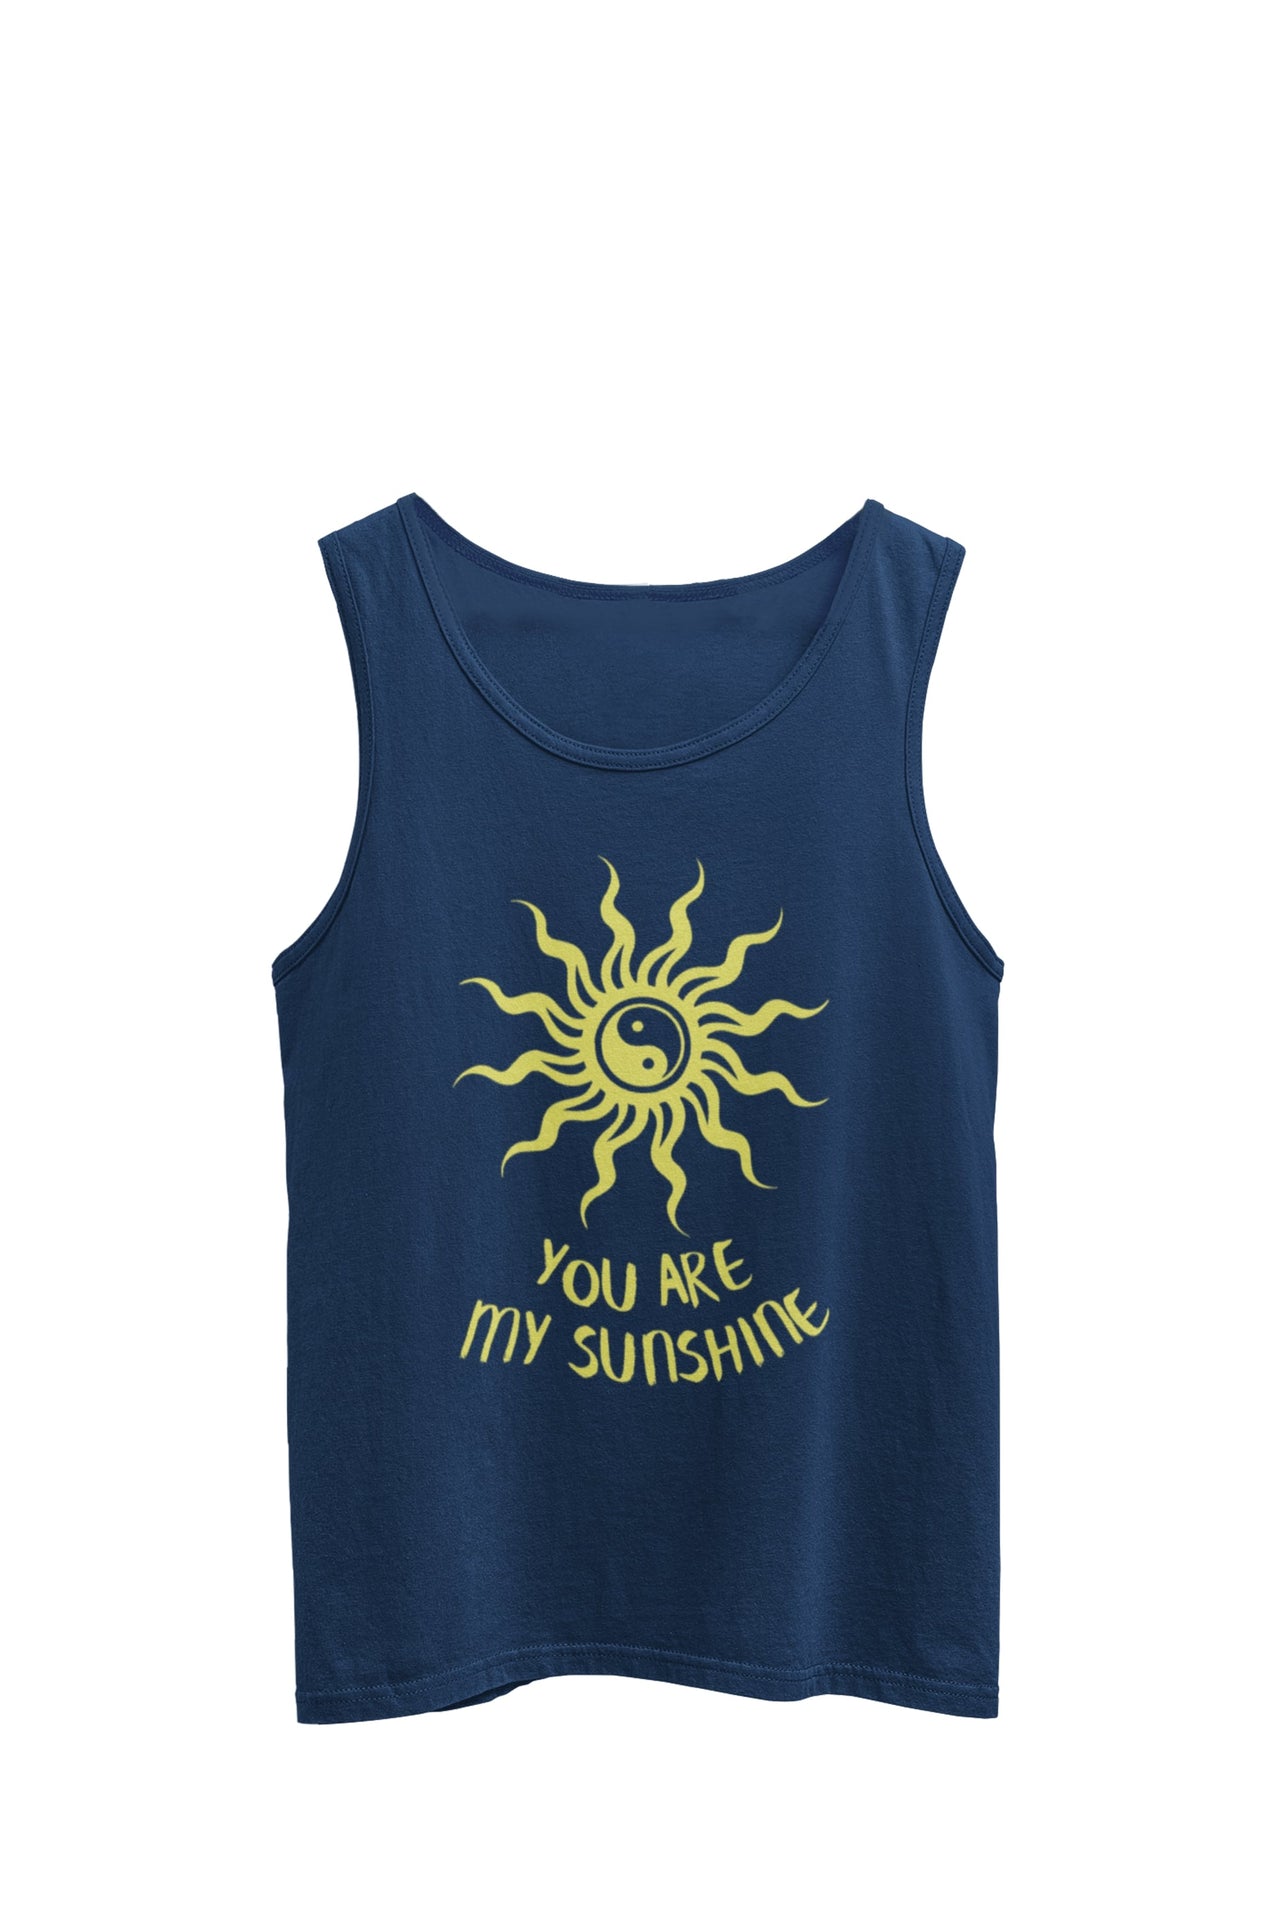 Navy Tank Top featuring a Yin Yang sun with bold rays and the text 'You are my sunshine', designed by WooHoo Apparel.